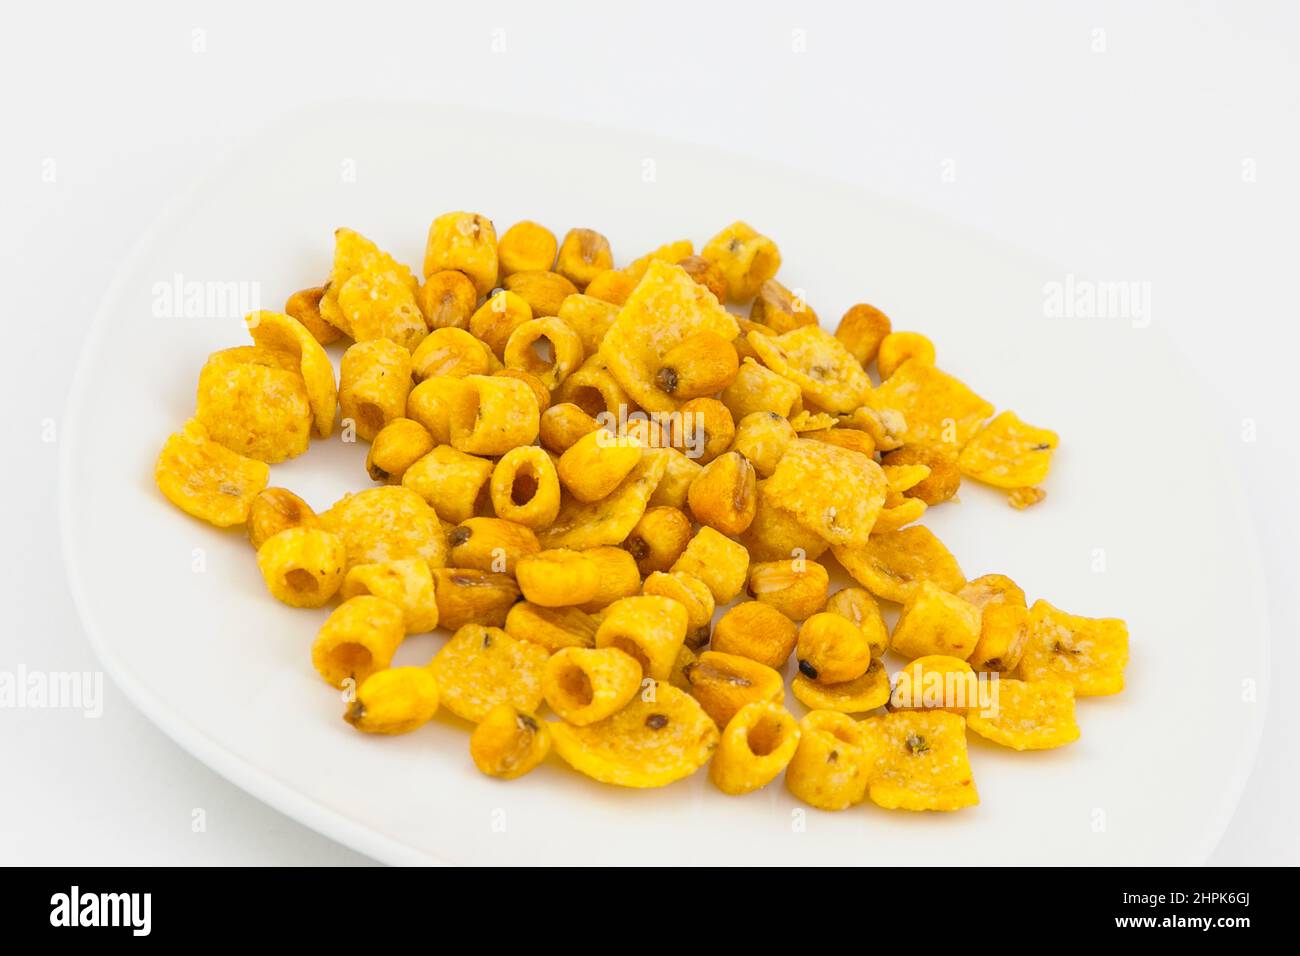 Food, Snacks, Barbeque flavoured baked corn shapes. Stock Photo